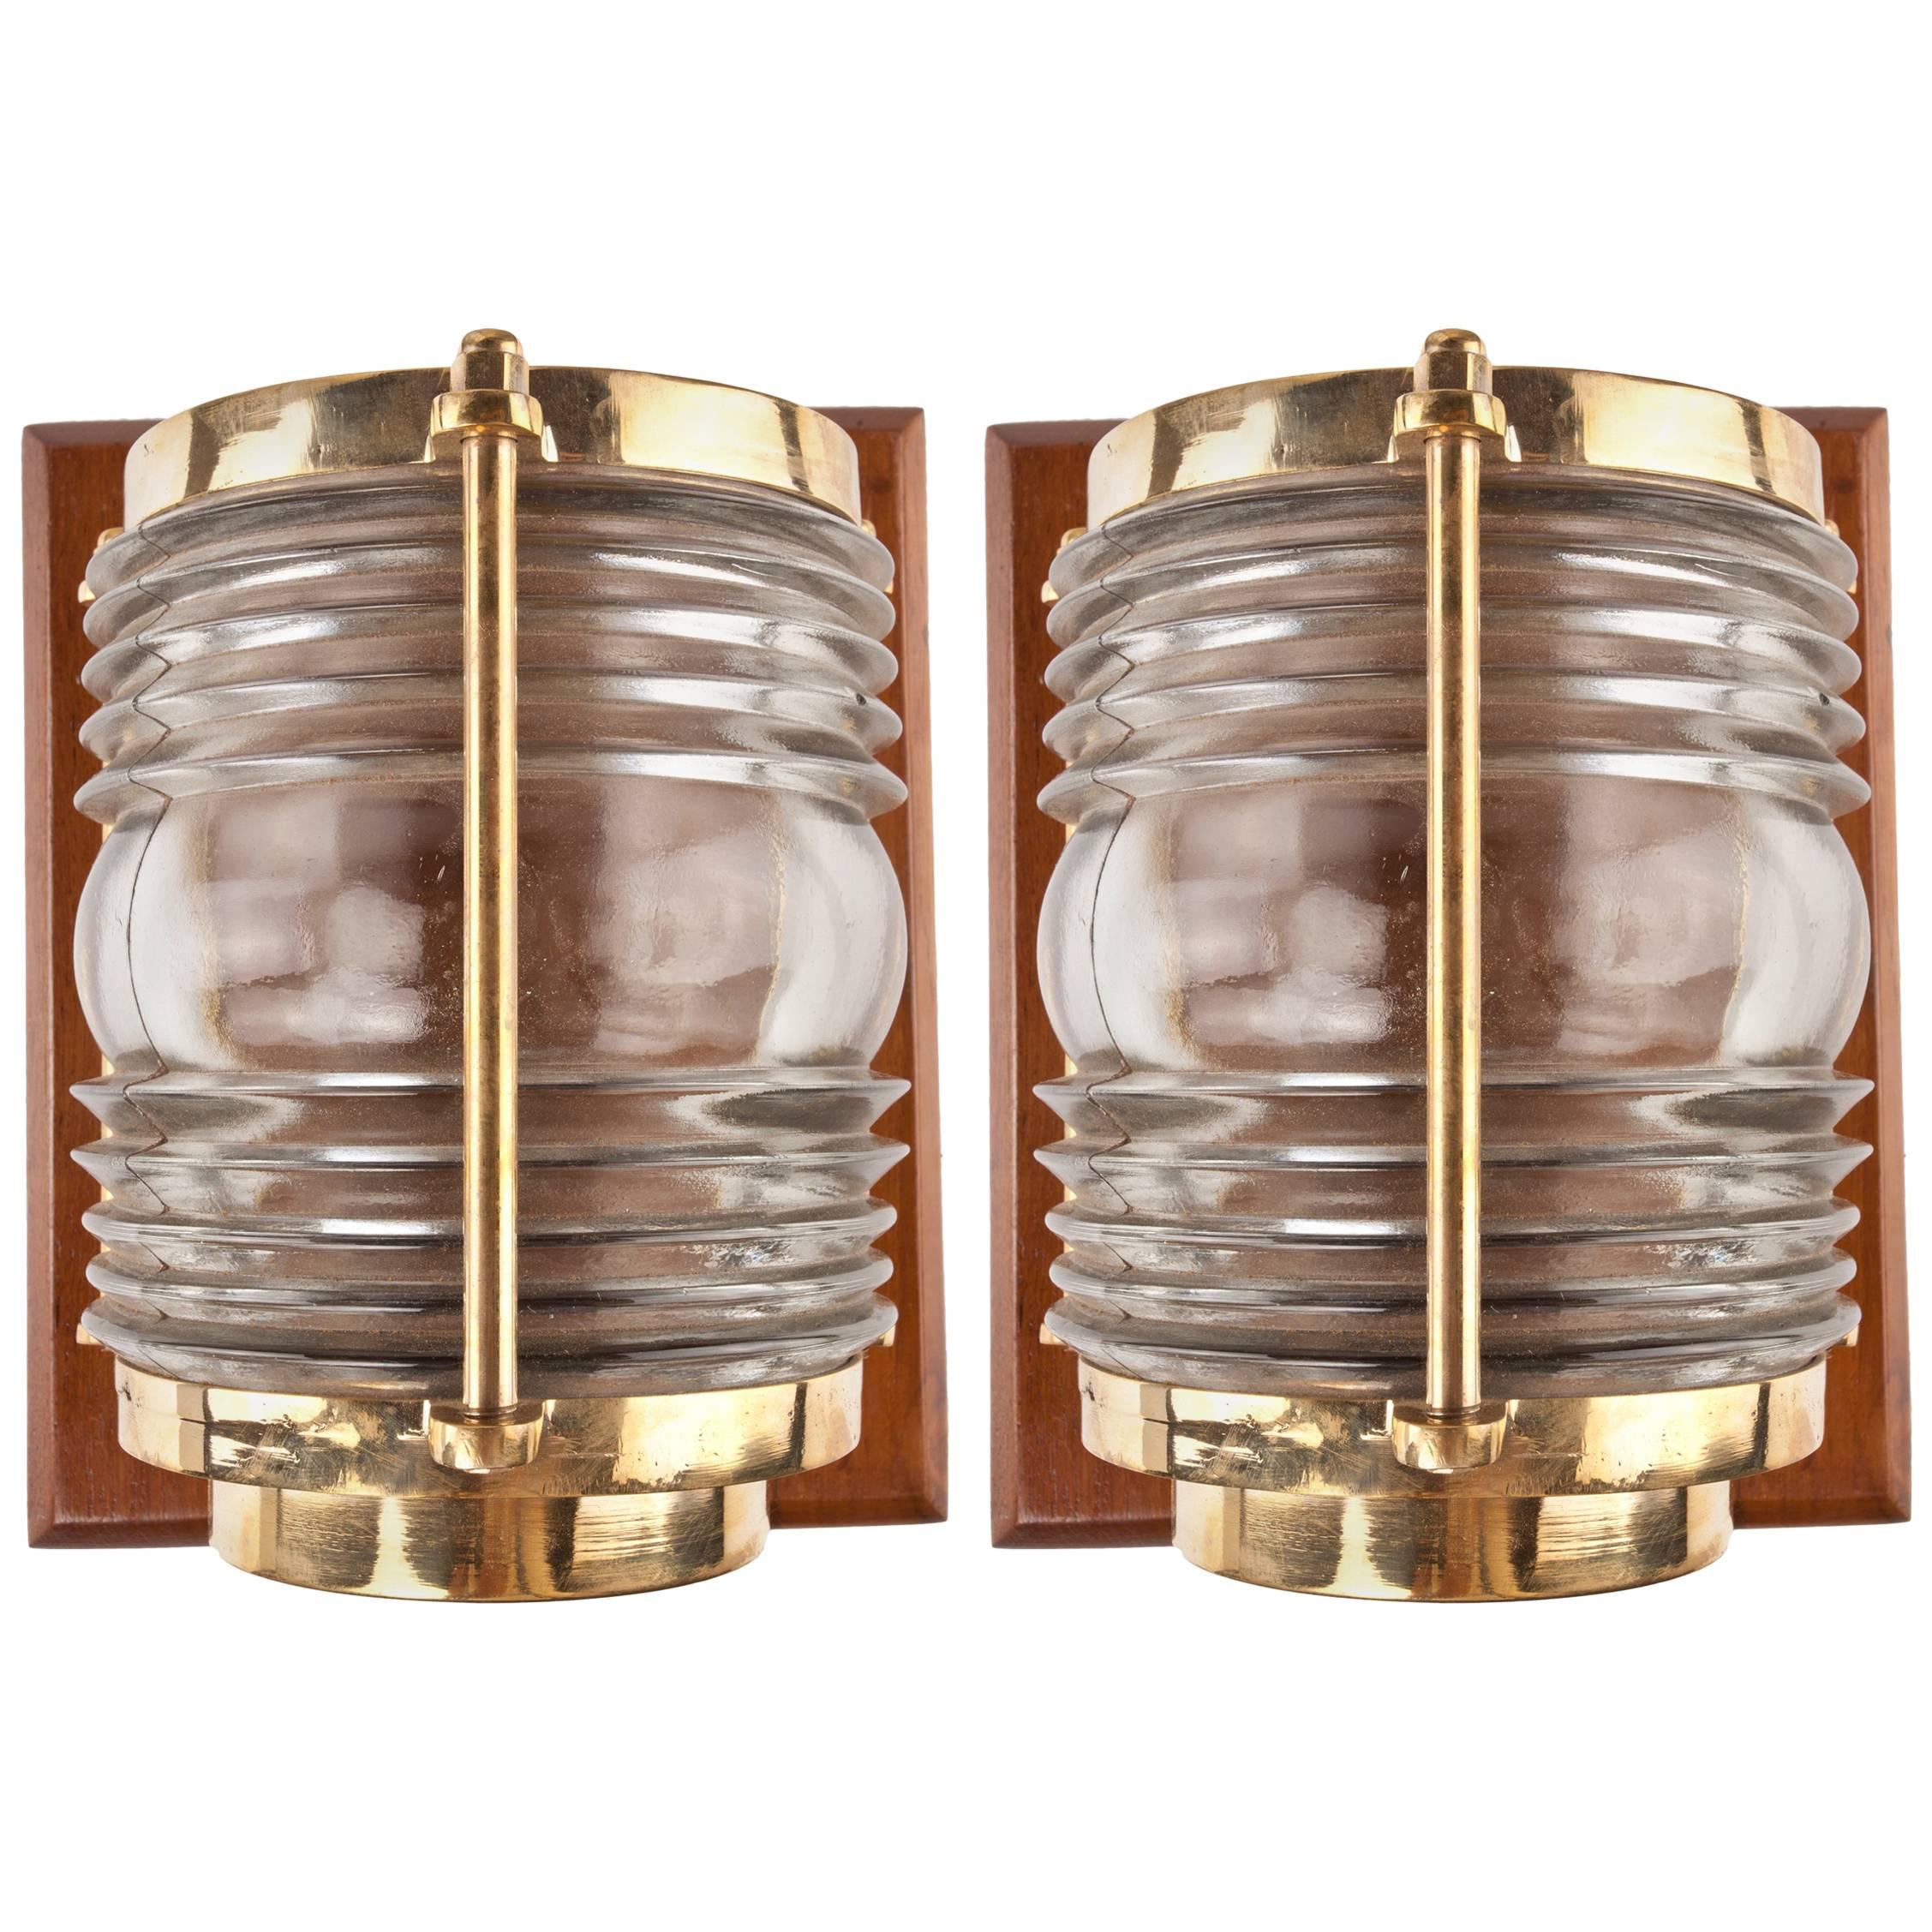 Pair of Ship's Brass Nautical Sconce Lights with Fresnel Lens